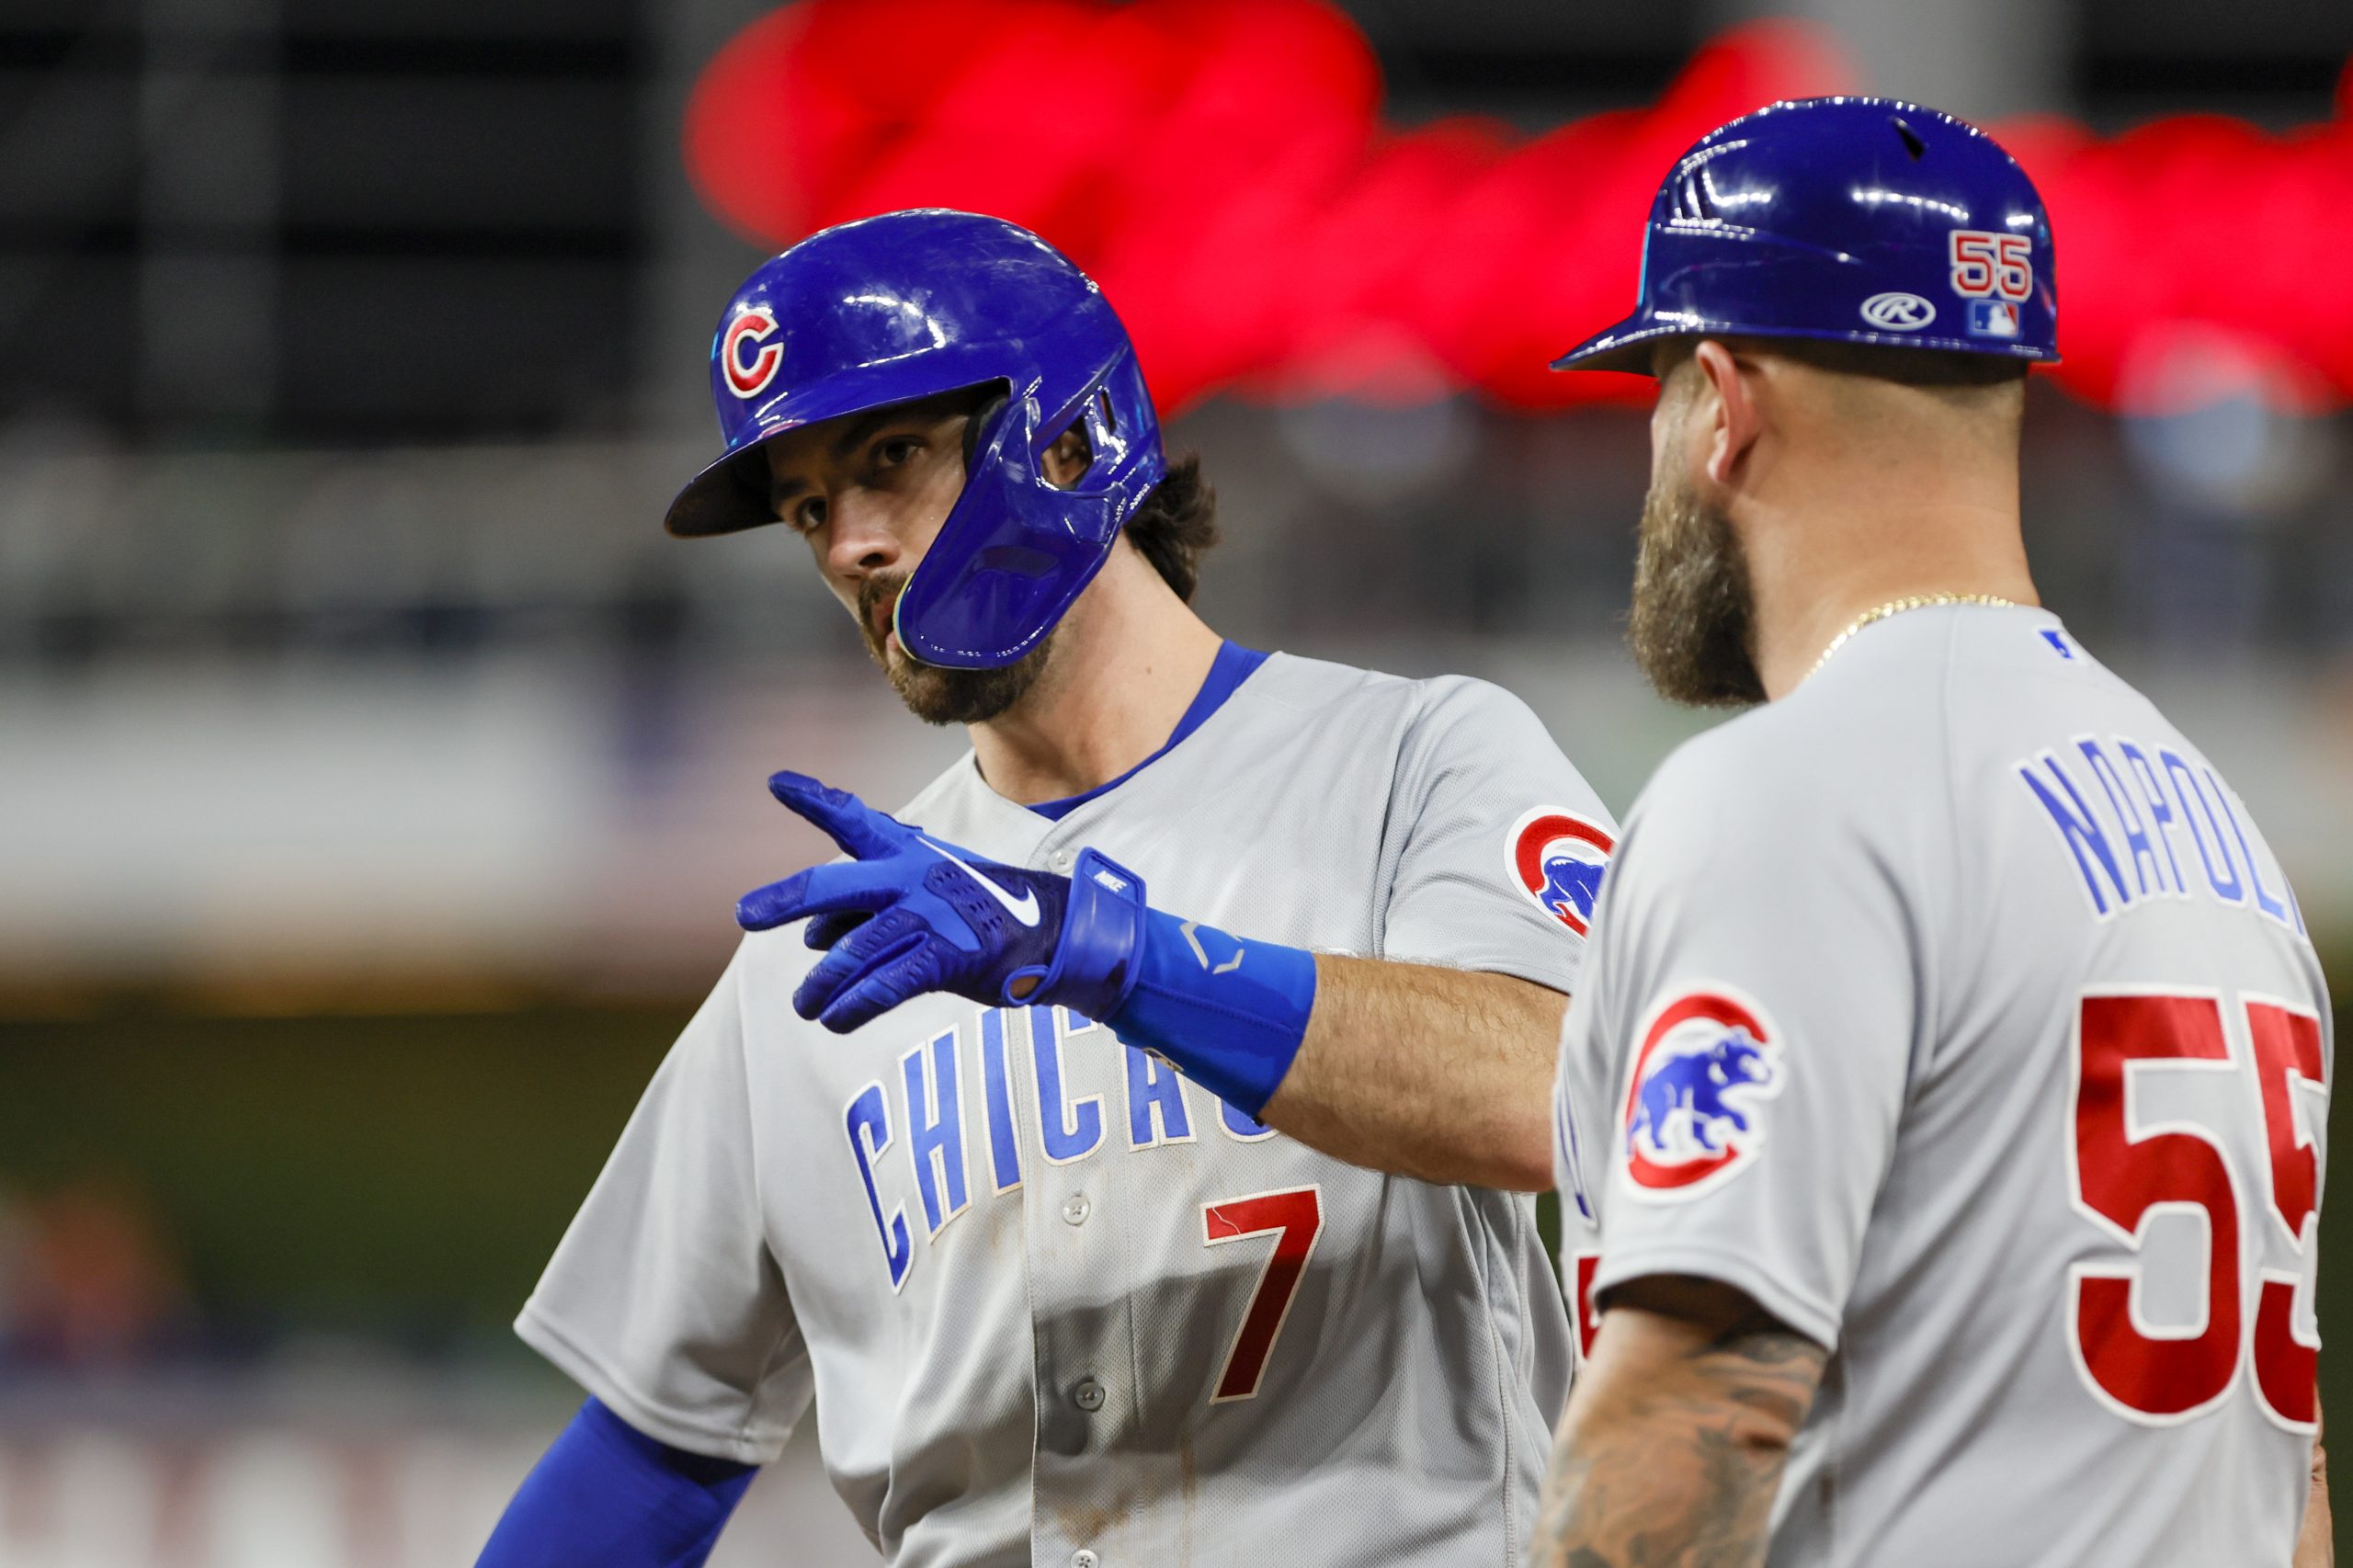 Chicago Cubs: Tucker Barnhart is providing some defensive value